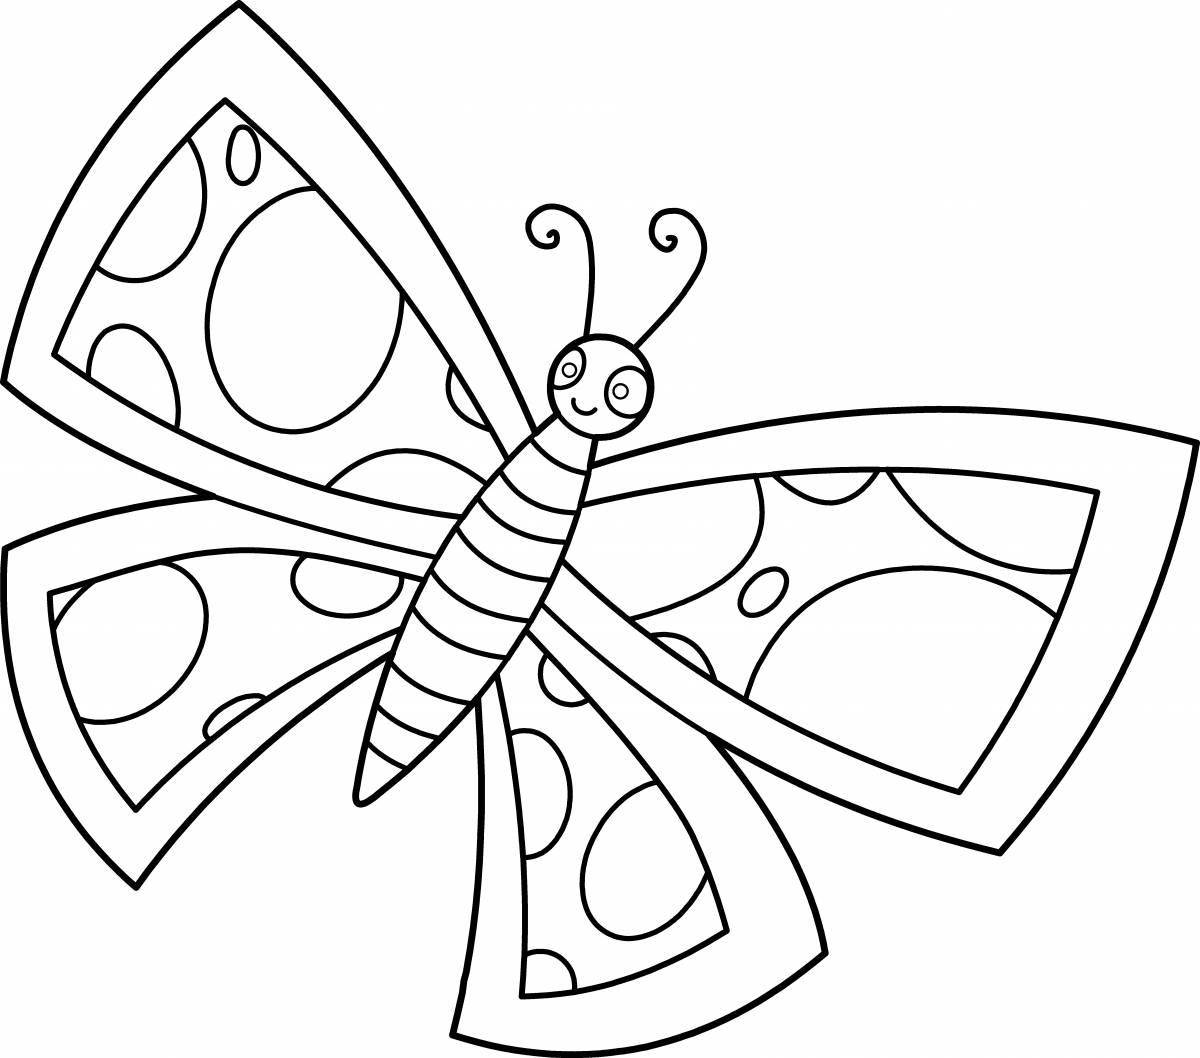 Fun coloring book with butterflies for 2-3 year olds